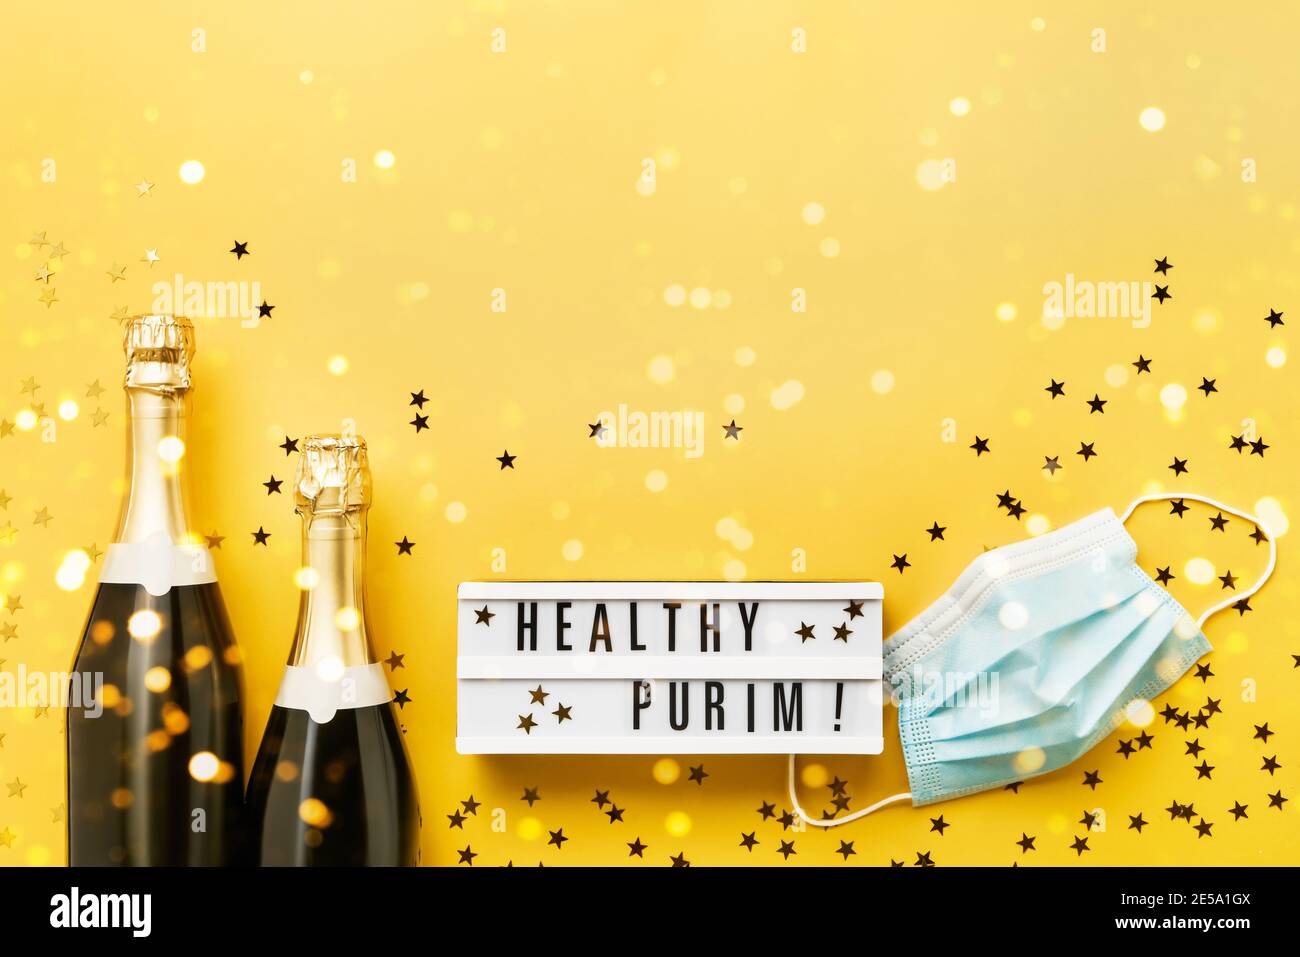 Healthy Purim written in lightbox and two champagne bottles, and medical mask on a yellow background. Flat lay of Purim Carnival celebration concept. Stock Photo